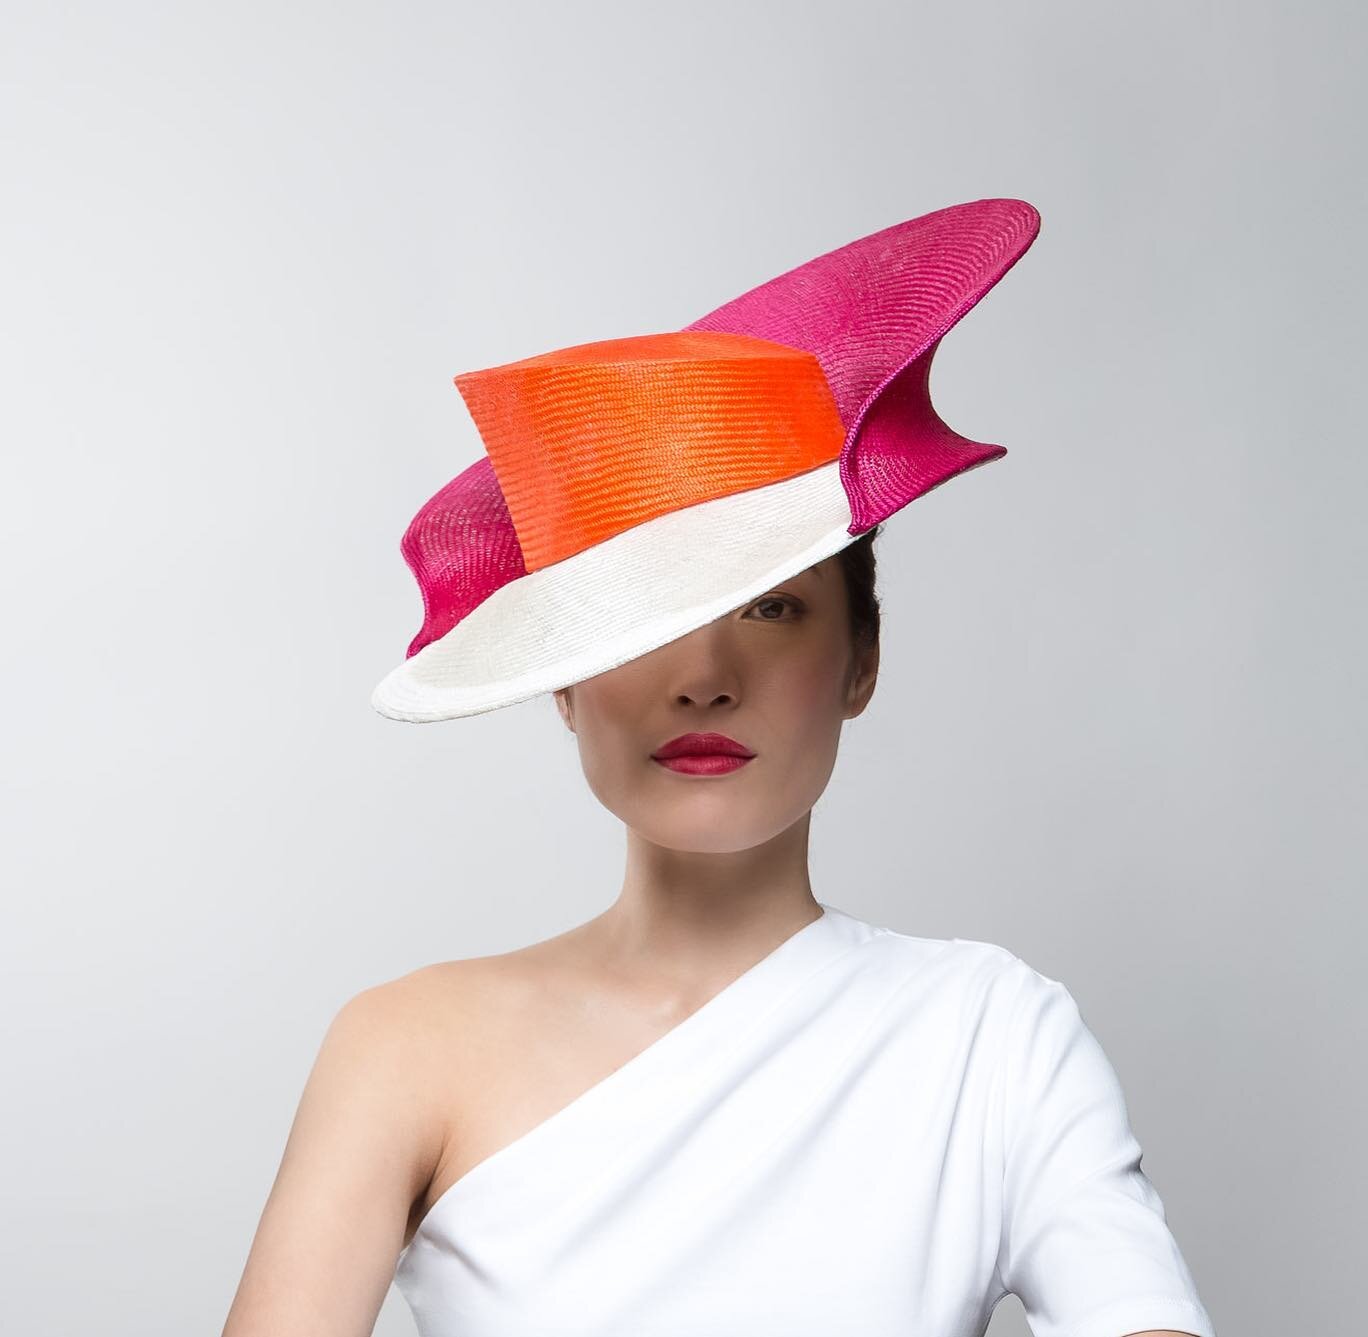 Very Convexing 

I let my new obsession with creating hat blocks be the inspiration for the &lsquo;Counterbalance&rsquo; themed Design Award for @millineryaustralia 

An experiment to sculpt a hat block shape that curves &ldquo;counter&rdquo; to the 